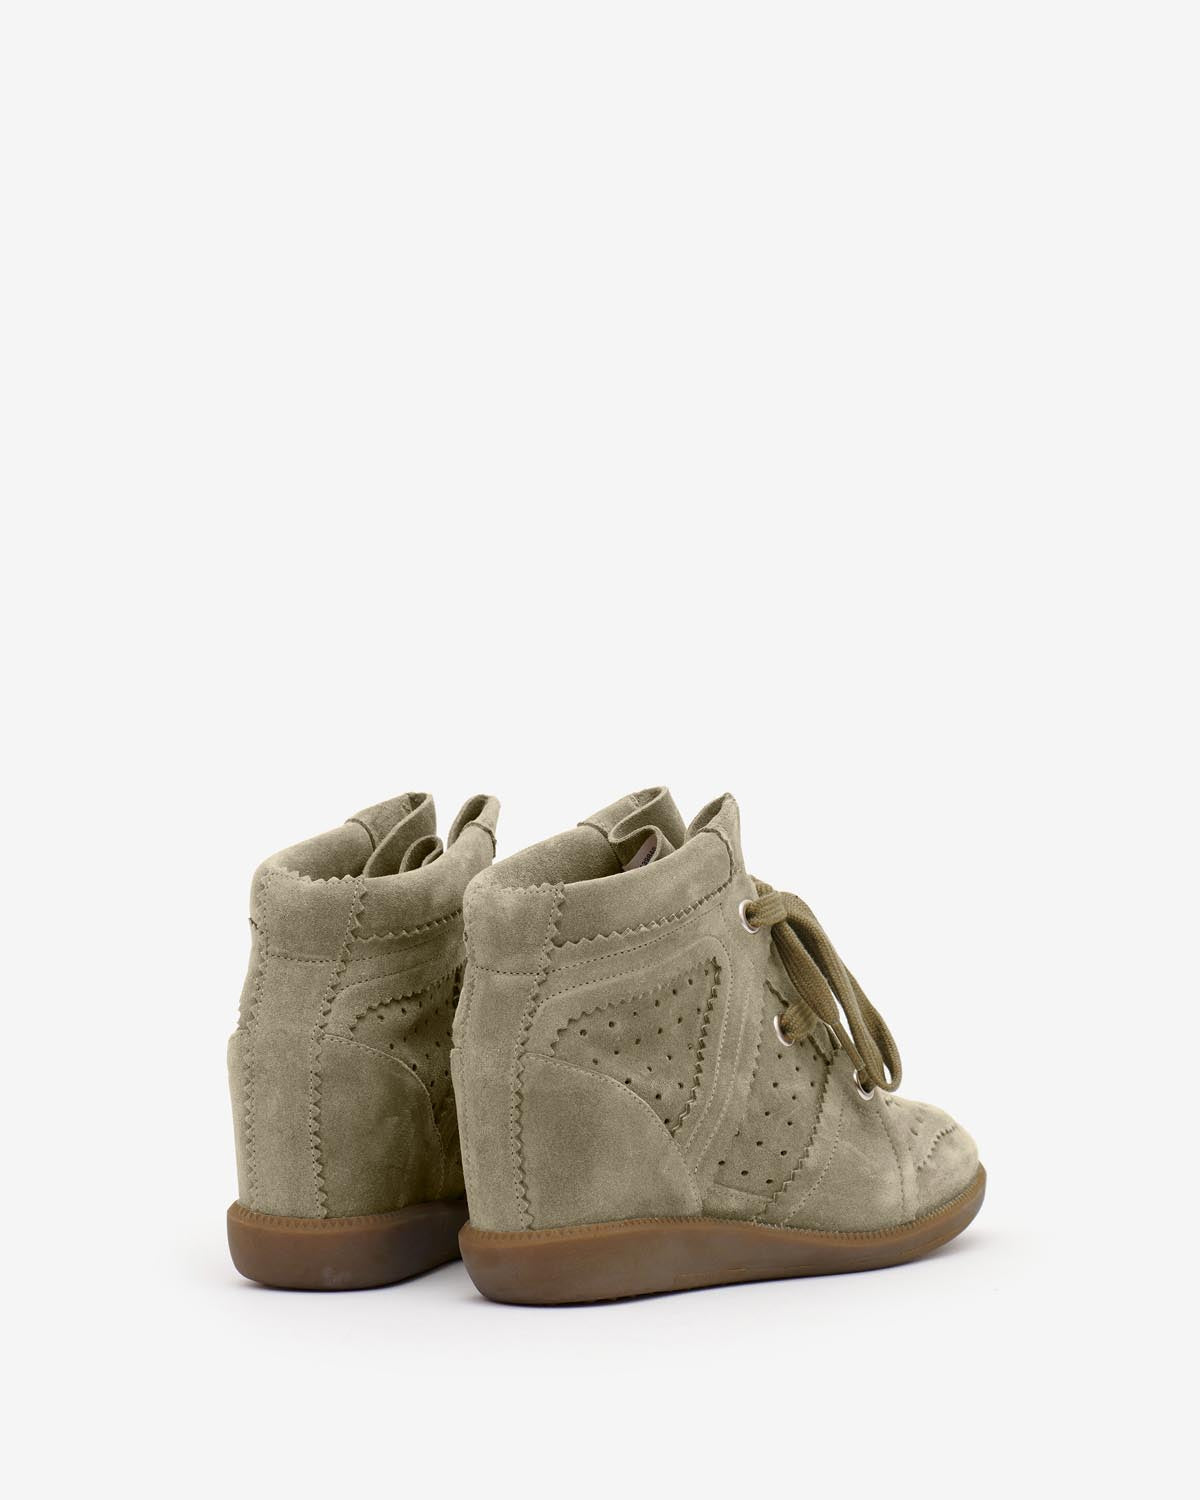 Bobby sneakers Woman Taupe 8